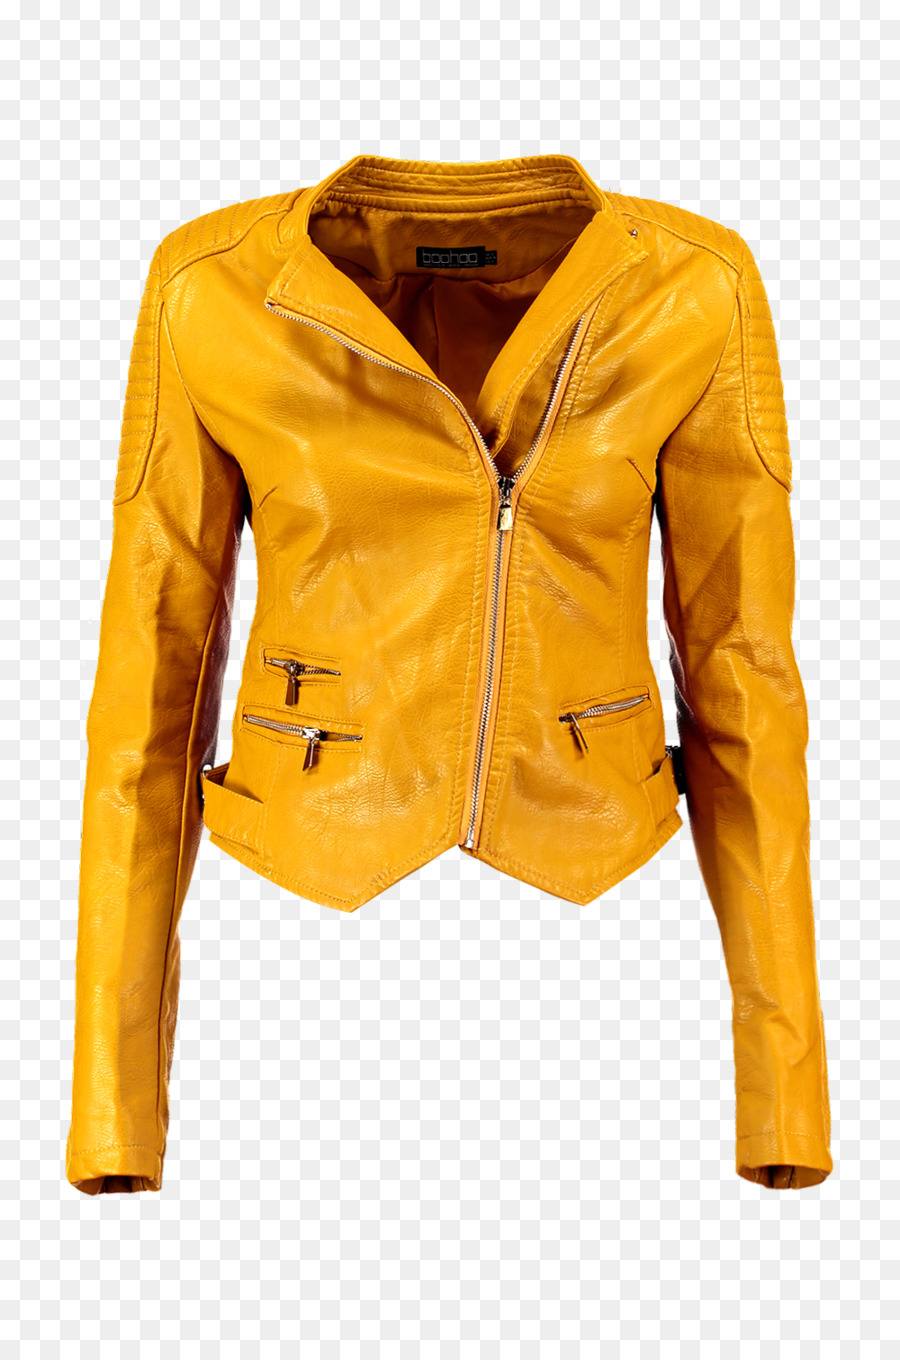 Leather jacket - yellow jacket png download - 1000*1500 - Free Transparent Leather Jacket png Download.